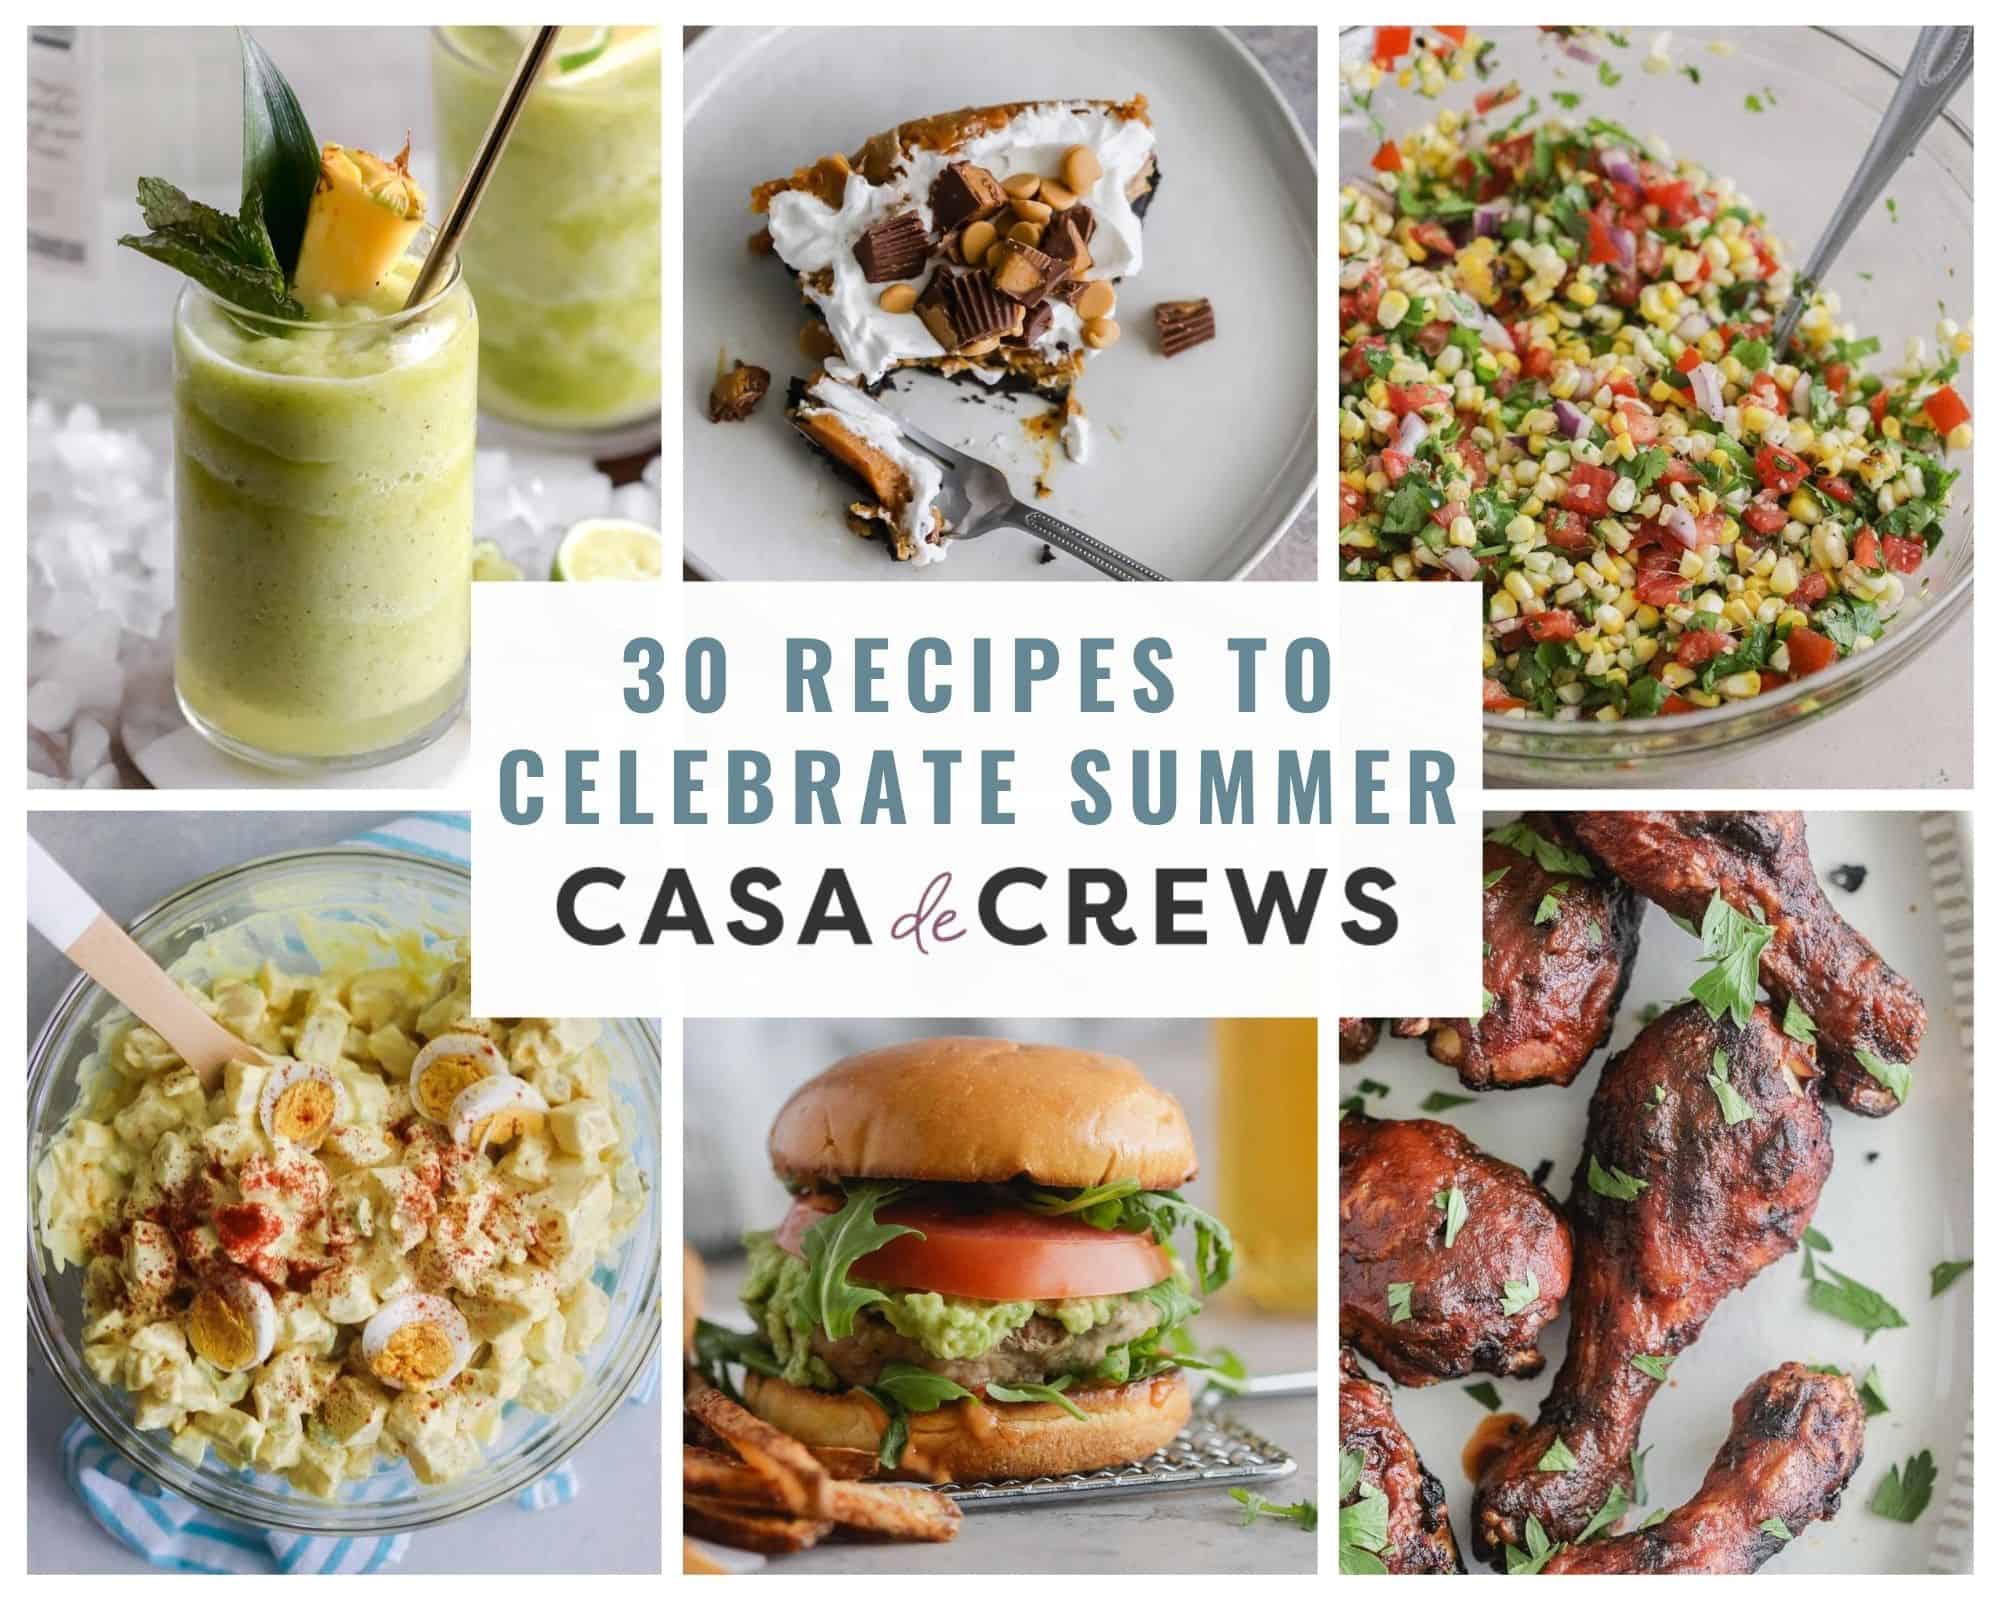 30 recipes to make in the summer